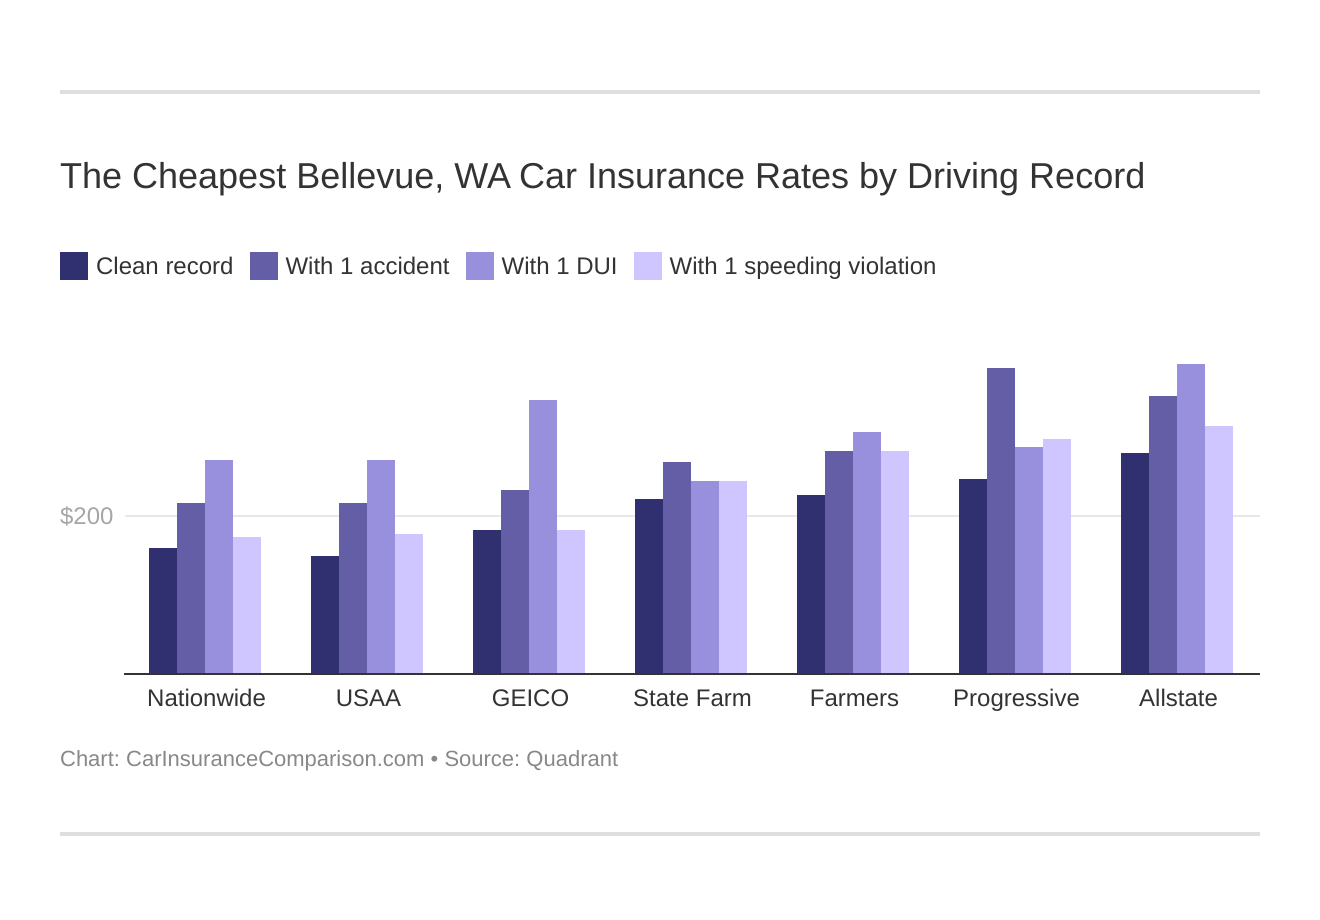 The Cheapest Bellevue, WA Car Insurance Rates by Driving Record